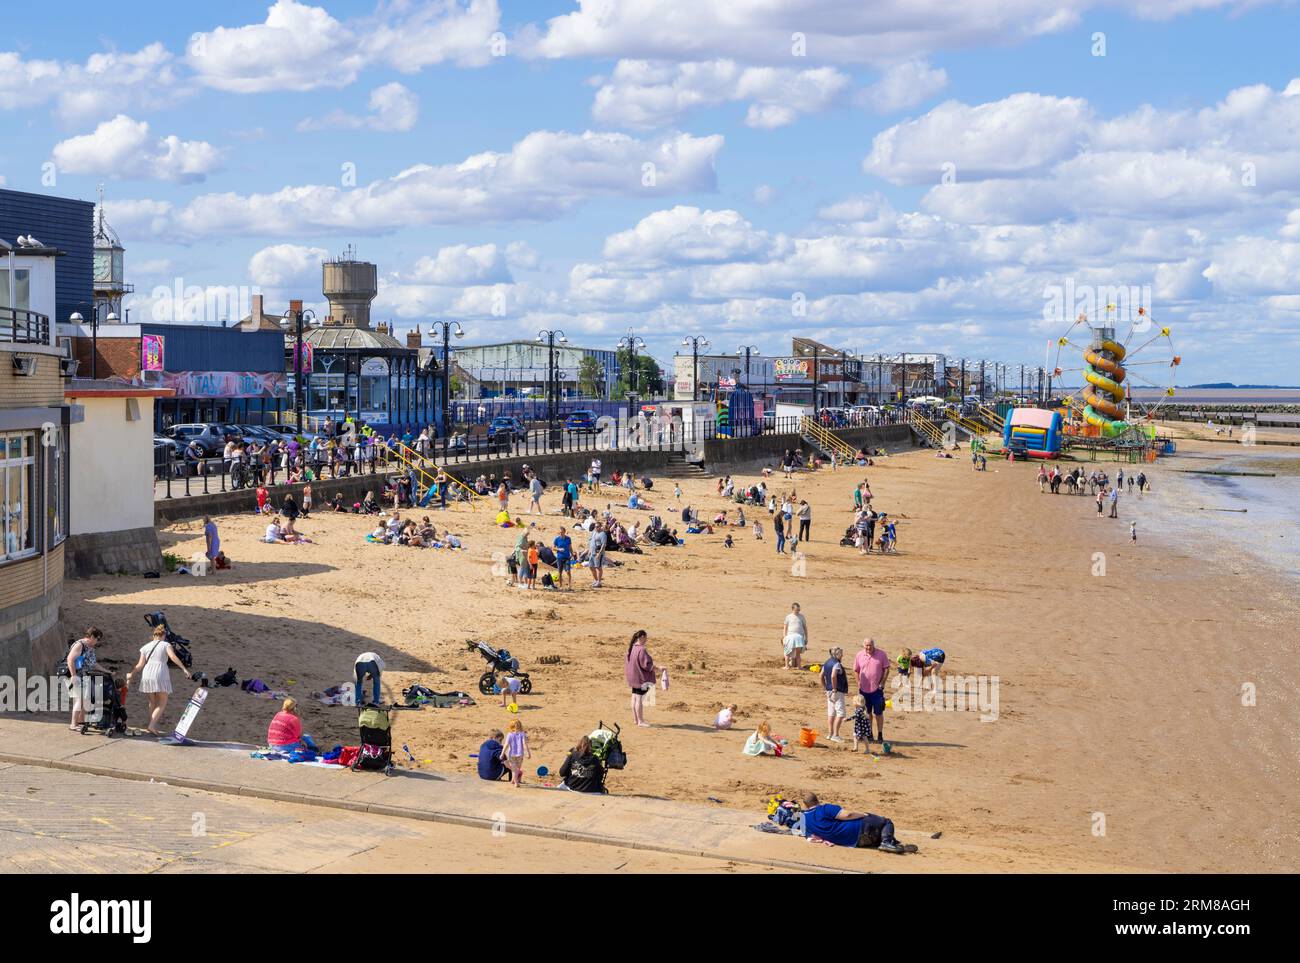 Busy beach at Cleethorpes Beach with Cleethorpes Fun Fair on the sands at Cleethorpes Lincolnshire England UK GB Europe Stock Photo